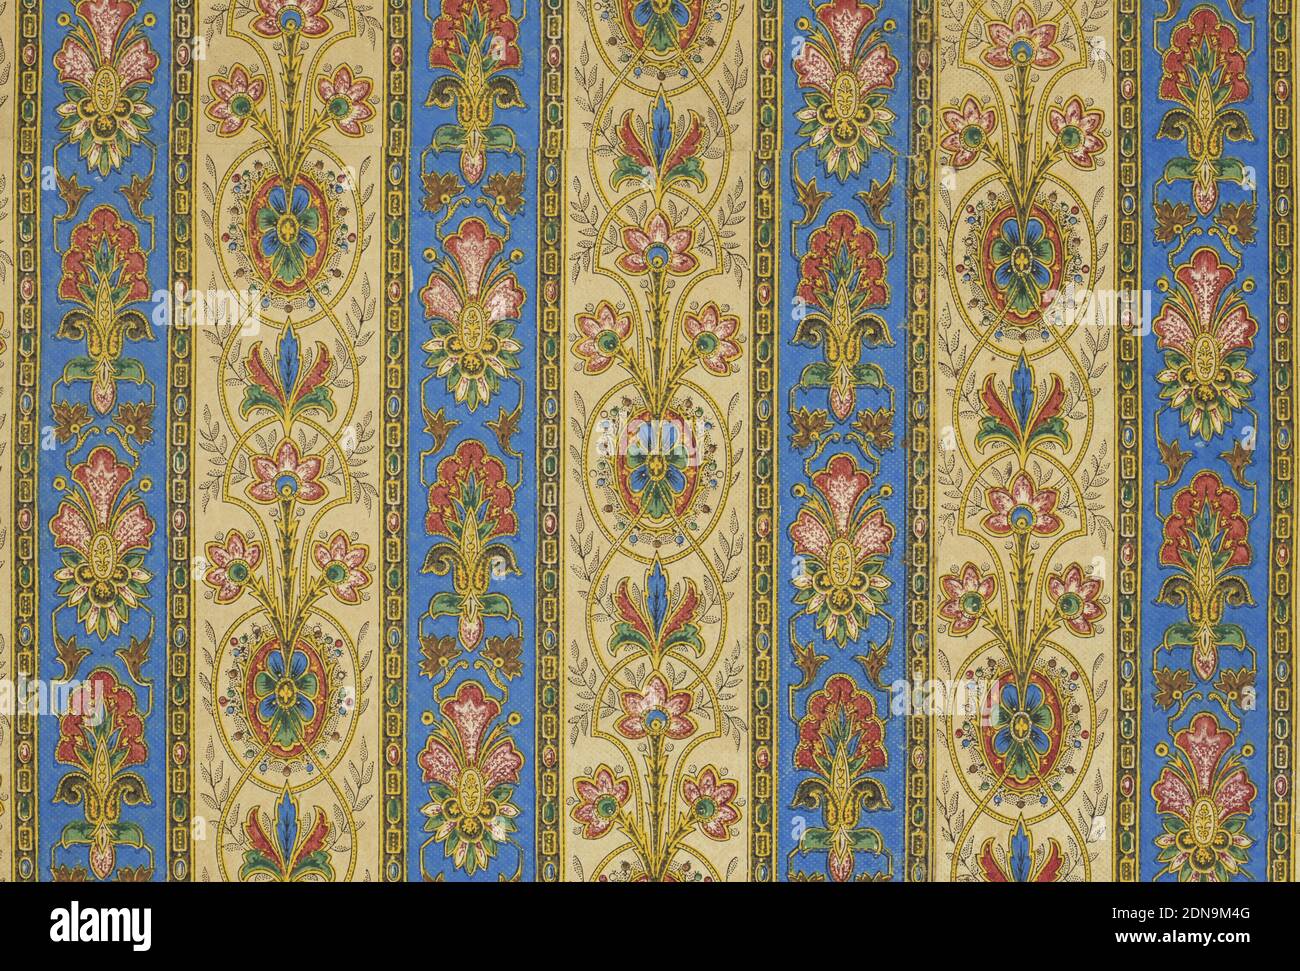 Curtain paper, Jeffrey & Company, 1836–1930 London, England, Machine-printed paper, embossed. Components a/p mounted on muslin, components s,t machine stitched threads, r) metal rings, s) brass eyes, 'a/q': Embossed in small-scale diamond-diaper pattern, vertical stripes: alternating white and bright blue backgrounds with short repeat floral and leaf patterns, symmetrical along vertical axes; strong multicolors, especially red, outlined in yellow. Stripes separated by black band between yellow lines, with string-of-beads pattern; 'r/u': tie backs of blue background striped, hemmed ends folded Stock Photo